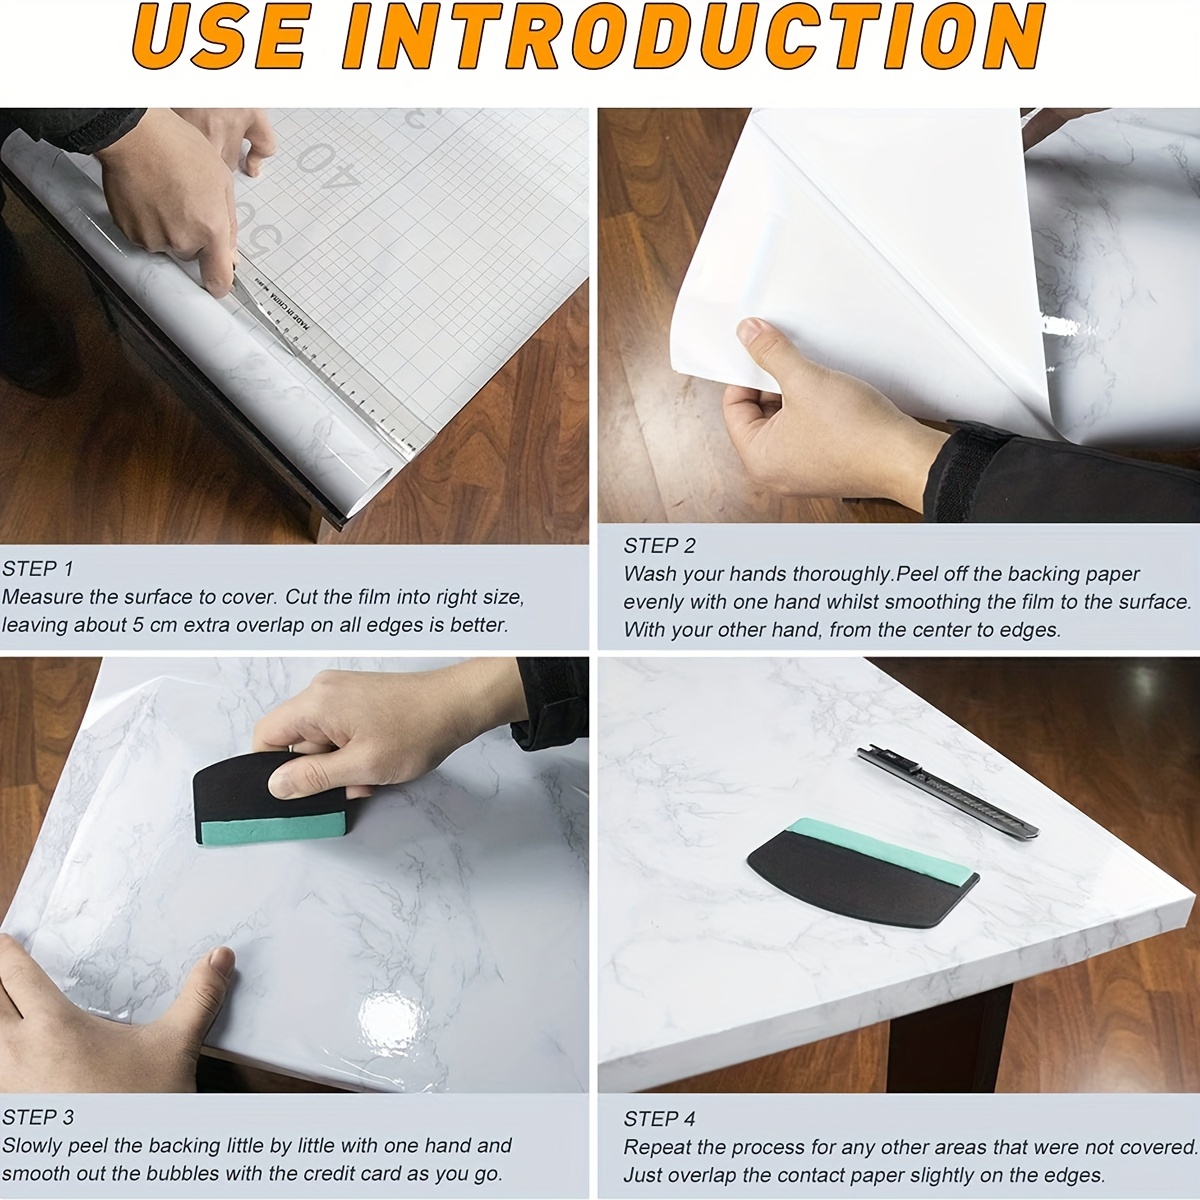 How to use contact paper to upgrade your space - Reviewed